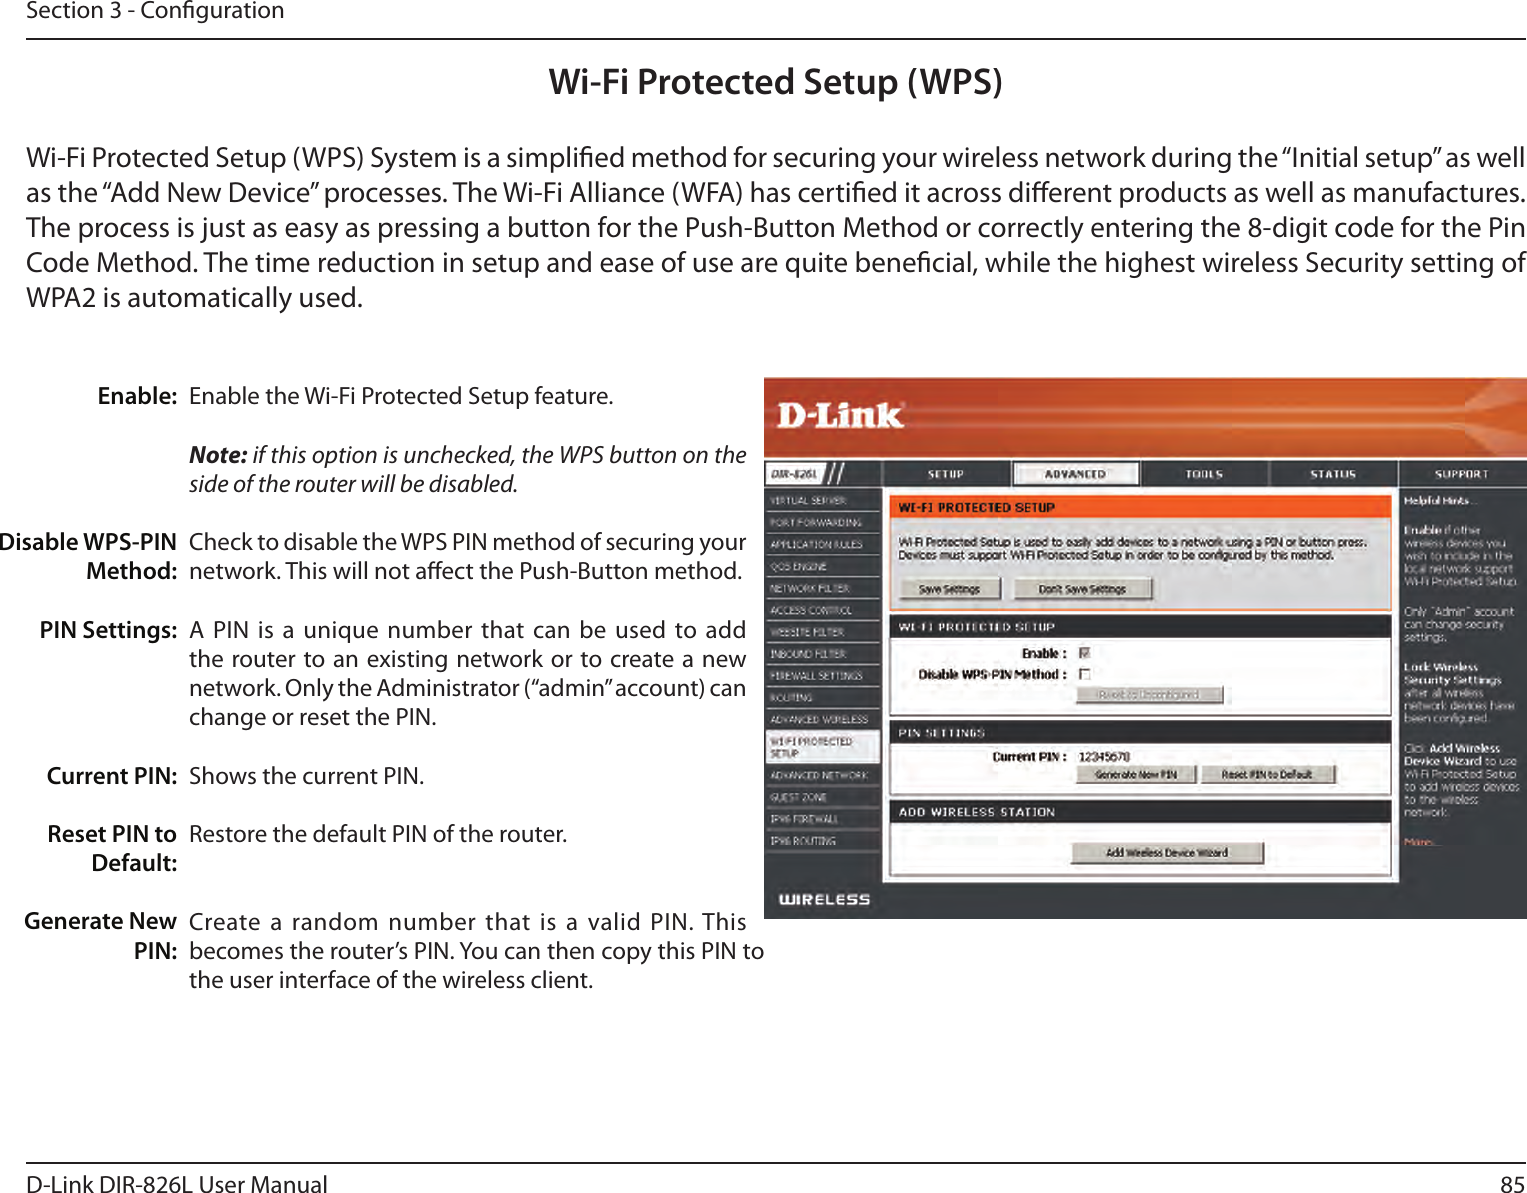 85D-Link DIR-826L User ManualSection 3 - CongurationWi-Fi Protected Setup (WPS)Enable the Wi-Fi Protected Setup feature. Note: if this option is unchecked, the WPS button on the side of the router will be disabled.Check to disable the WPS PIN method of securing your network. This will not aect the Push-Button method.A PIN is  a unique number  that can be  used to add the router to an existing network or to create a new network. Only the Administrator (“admin” account) can change or reset the PIN. Shows the current PIN. Restore the default PIN of the router. Create a random  number that is a valid PIN. This becomes the router’s PIN. You can then copy this PIN to the user interface of the wireless client.Enable:Disable WPS-PIN Method:PIN Settings:Current PIN:Reset PIN to Default:Generate New PIN:Wi-Fi Protected Setup (WPS) System is a simplied method for securing your wireless network during the “Initial setup” as well as the “Add New Device” processes. The Wi-Fi Alliance (WFA) has certied it across dierent products as well as manufactures. The process is just as easy as pressing a button for the Push-Button Method or correctly entering the 8-digit code for the Pin Code Method. The time reduction in setup and ease of use are quite benecial, while the highest wireless Security setting of WPA2 is automatically used.